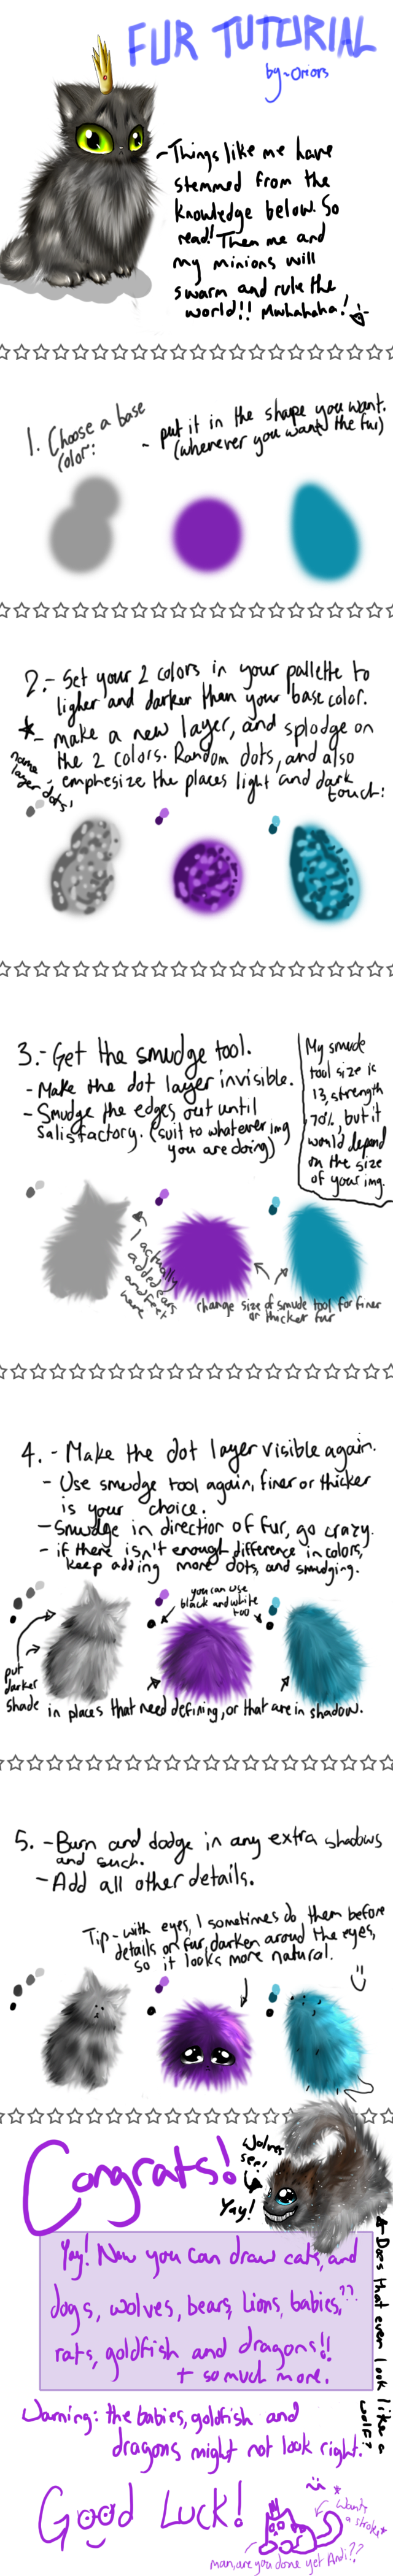 Simple Fur Tutorial by OryxPixie on DeviantArt